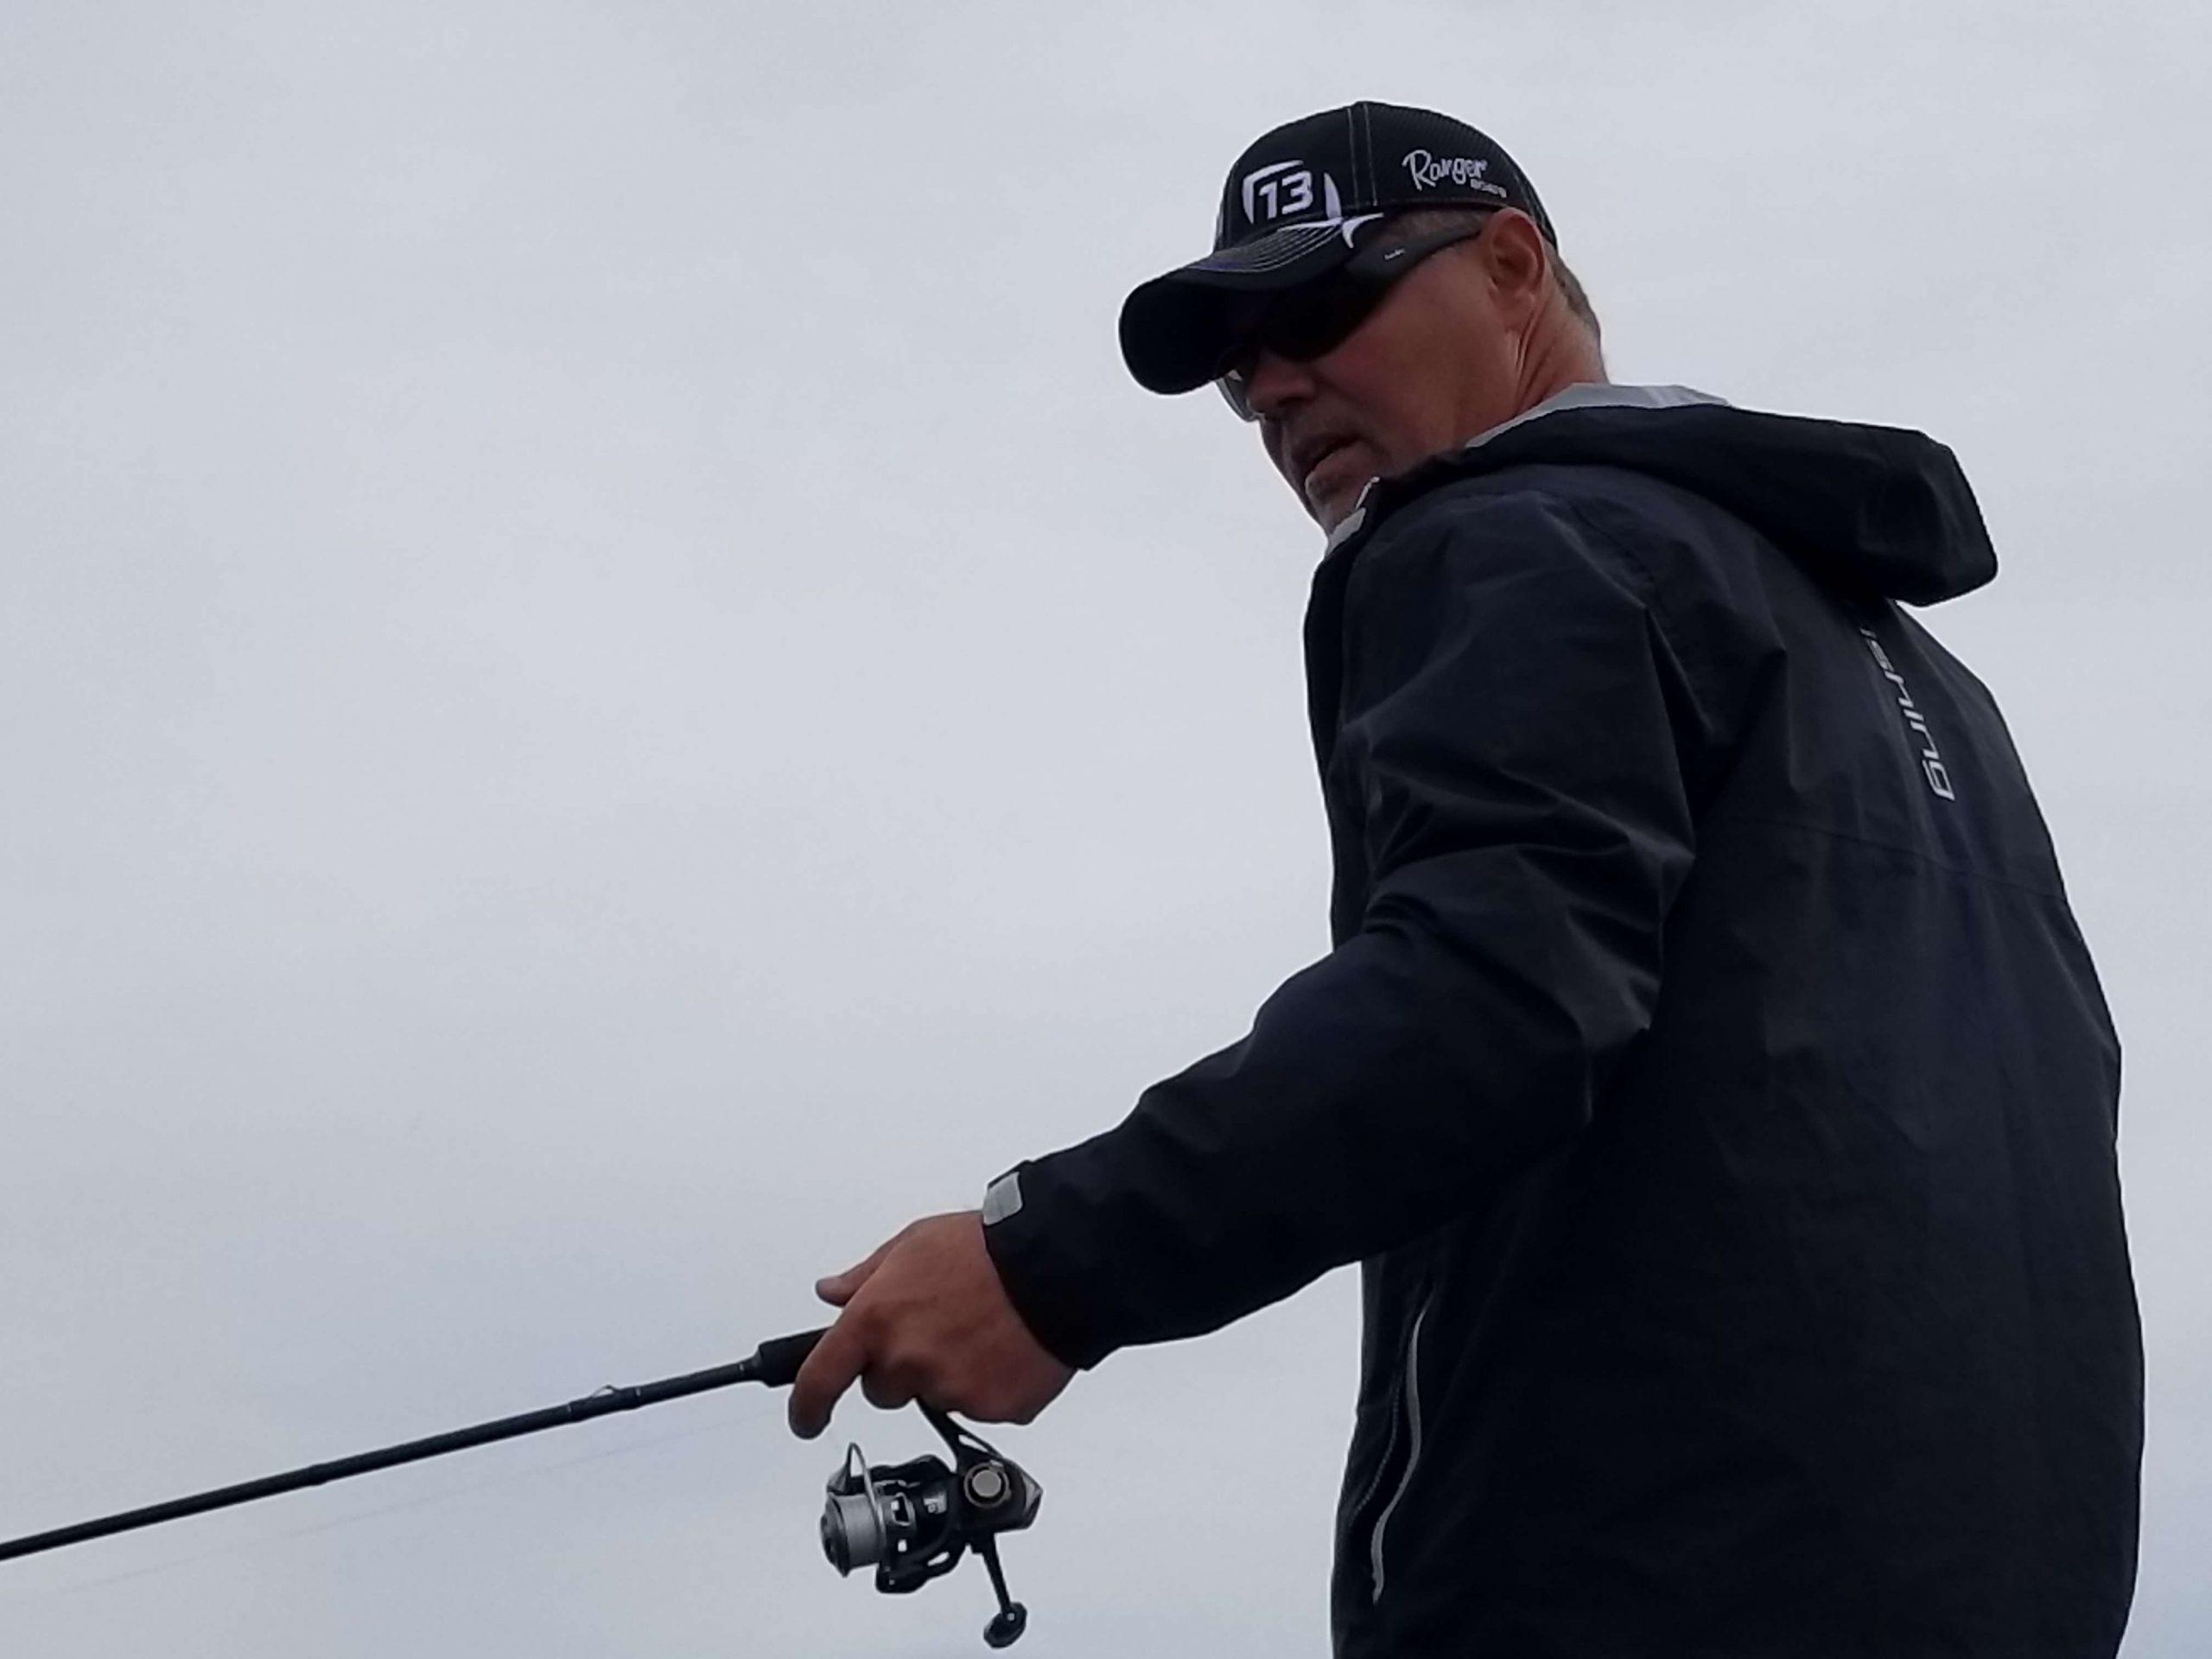 Dave Lefebre Bassmaster elite series at lake Oahe day 2. After a morning start delay Dave is on his and getting down to business. 